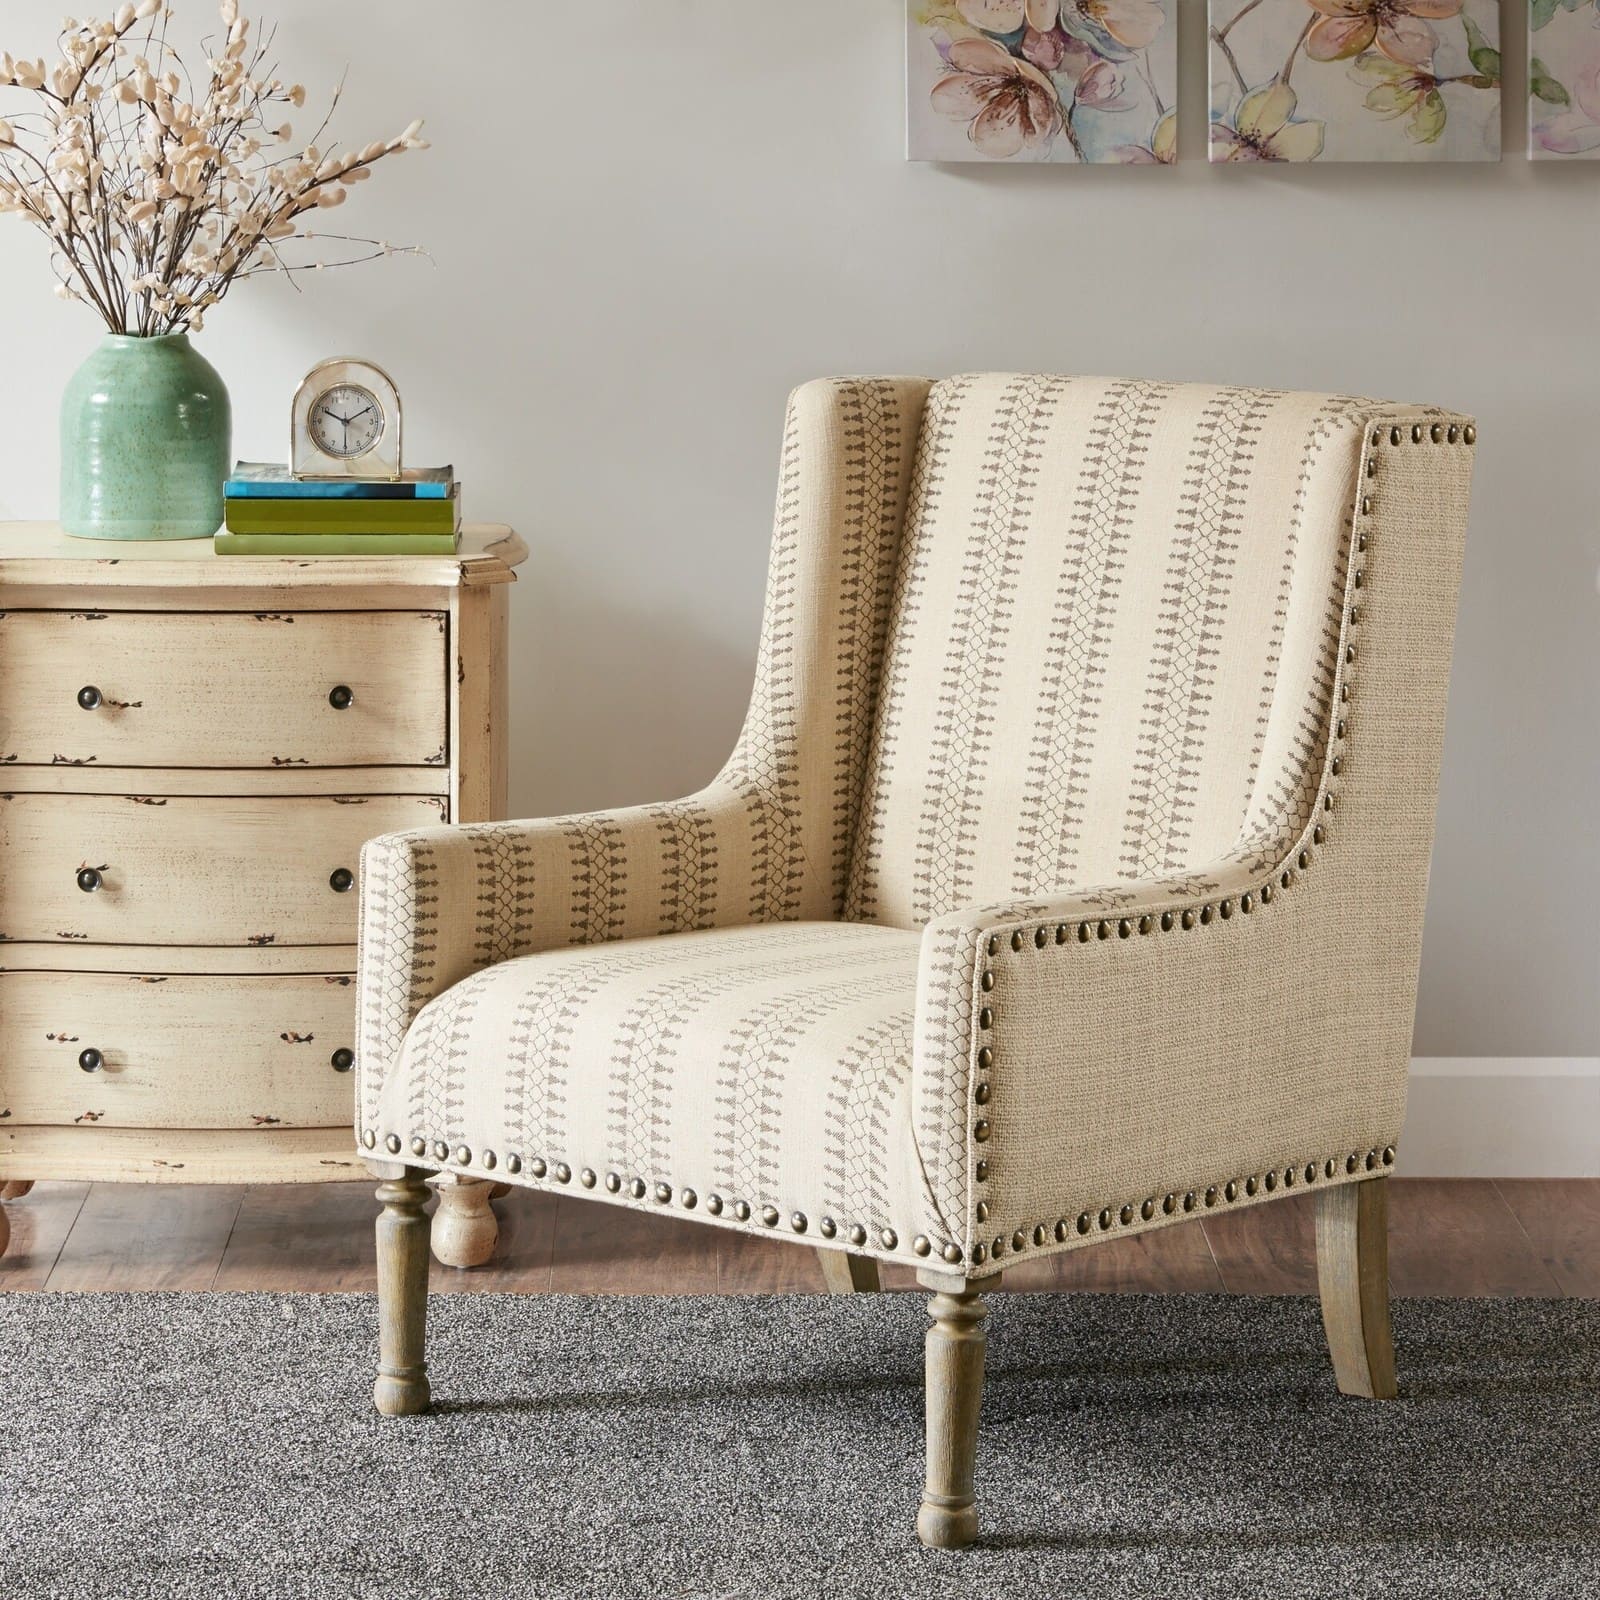 Create Seating Arrangements with Simple Accent Chairs